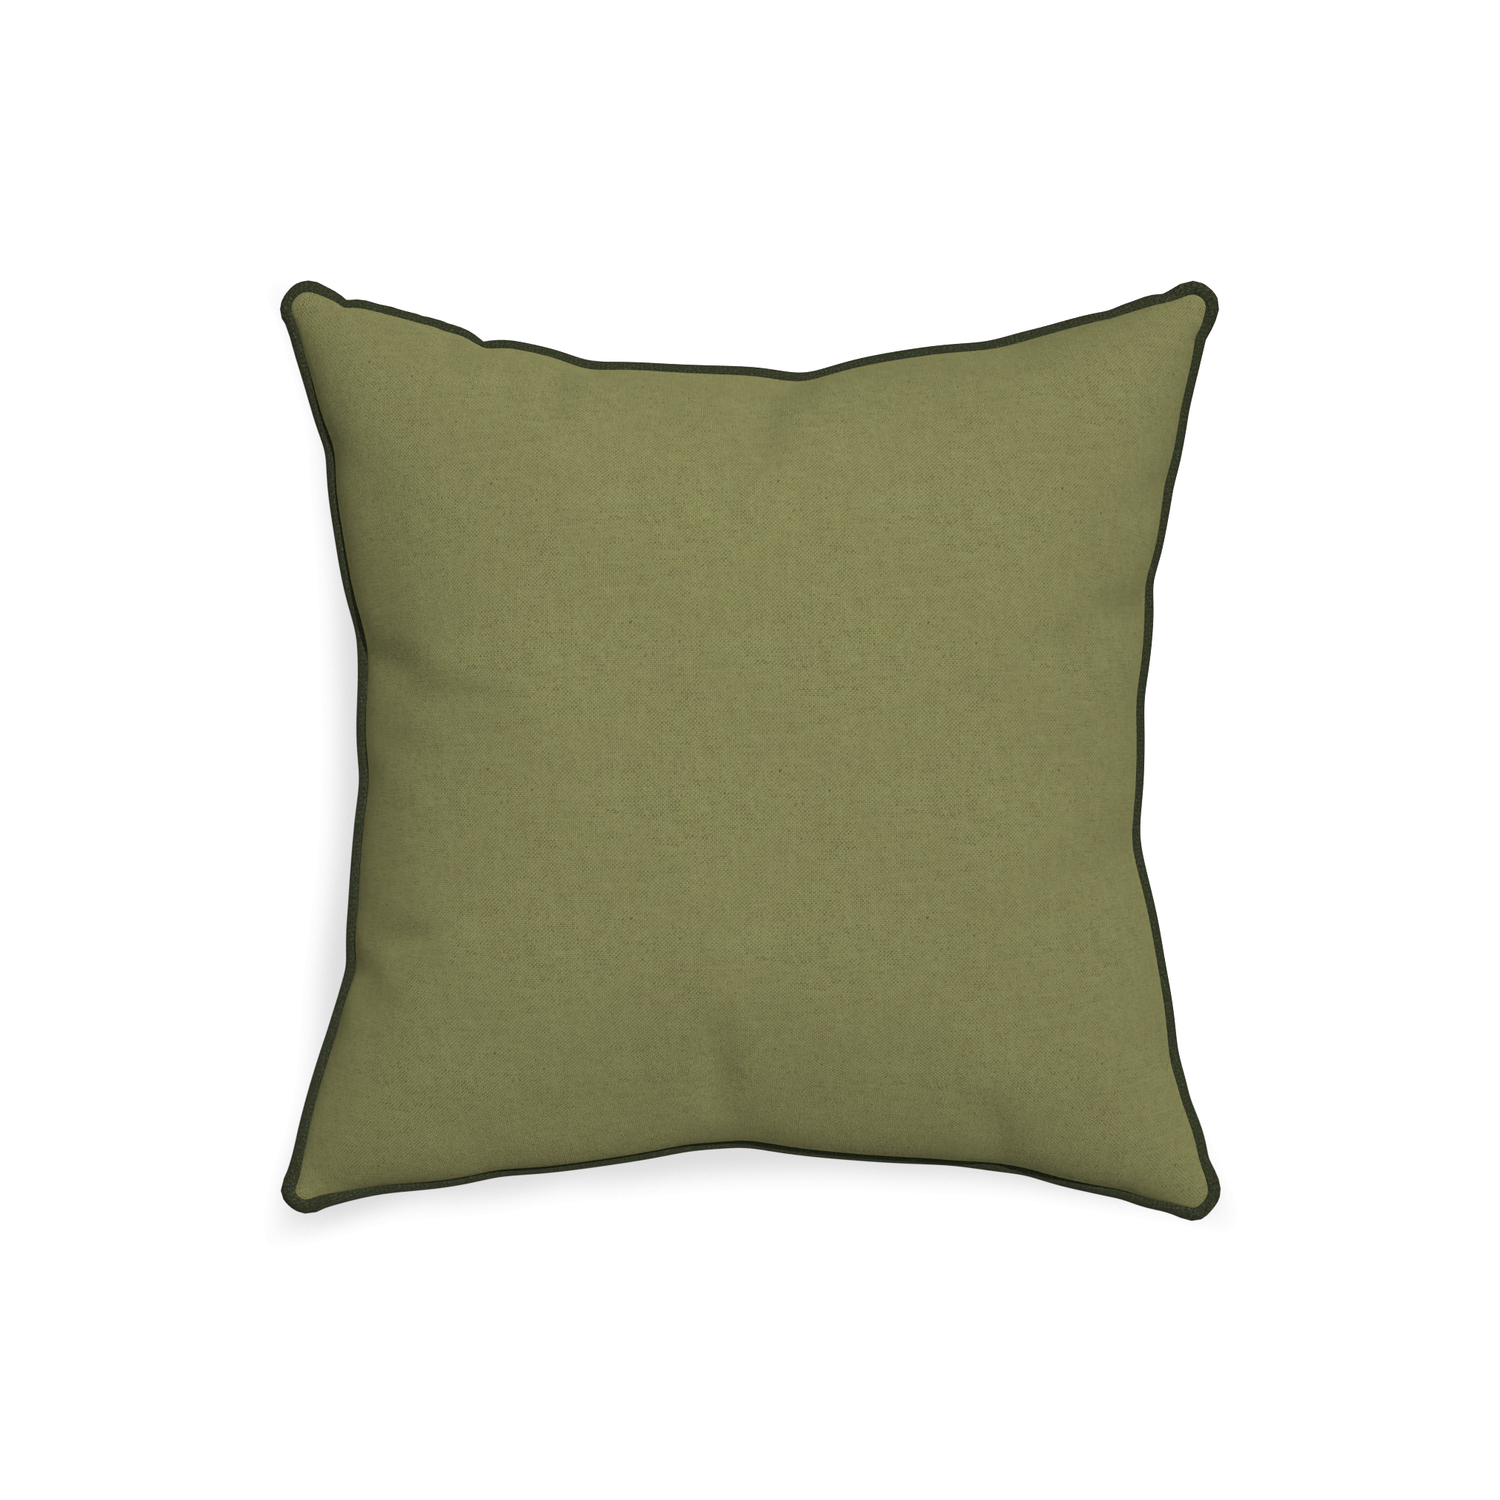 20-square moss custom moss greenpillow with f piping on white background